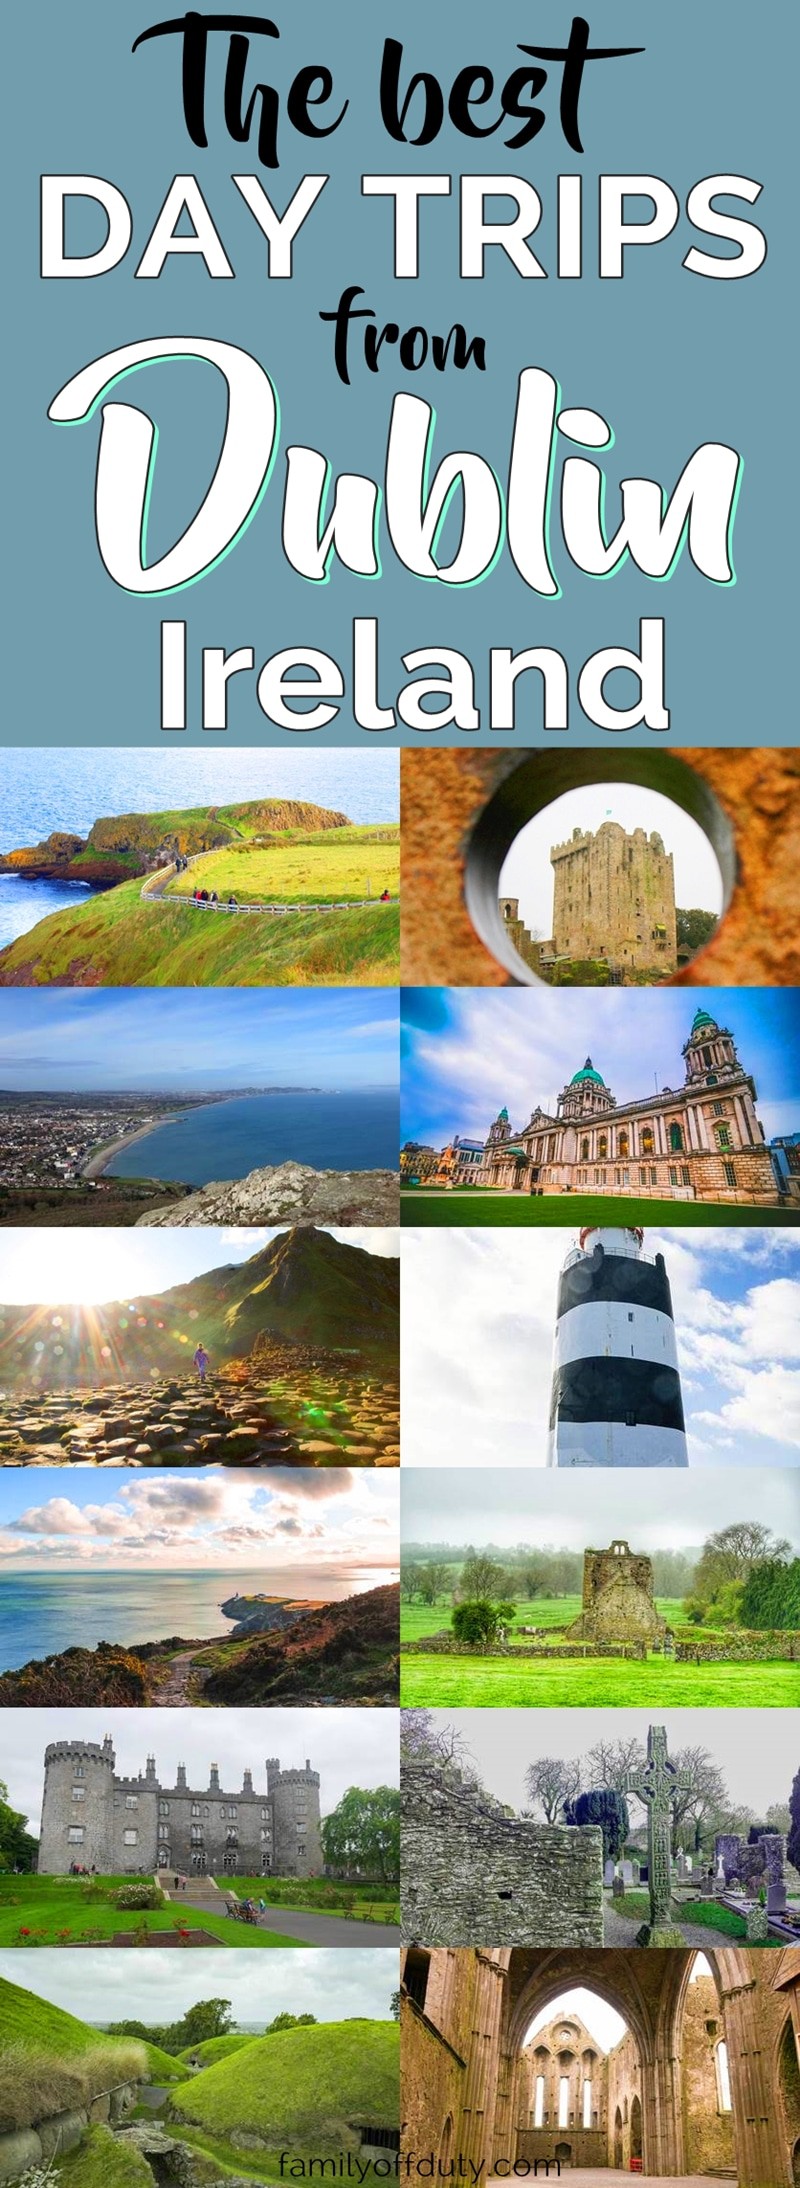 The best day trips from dublin